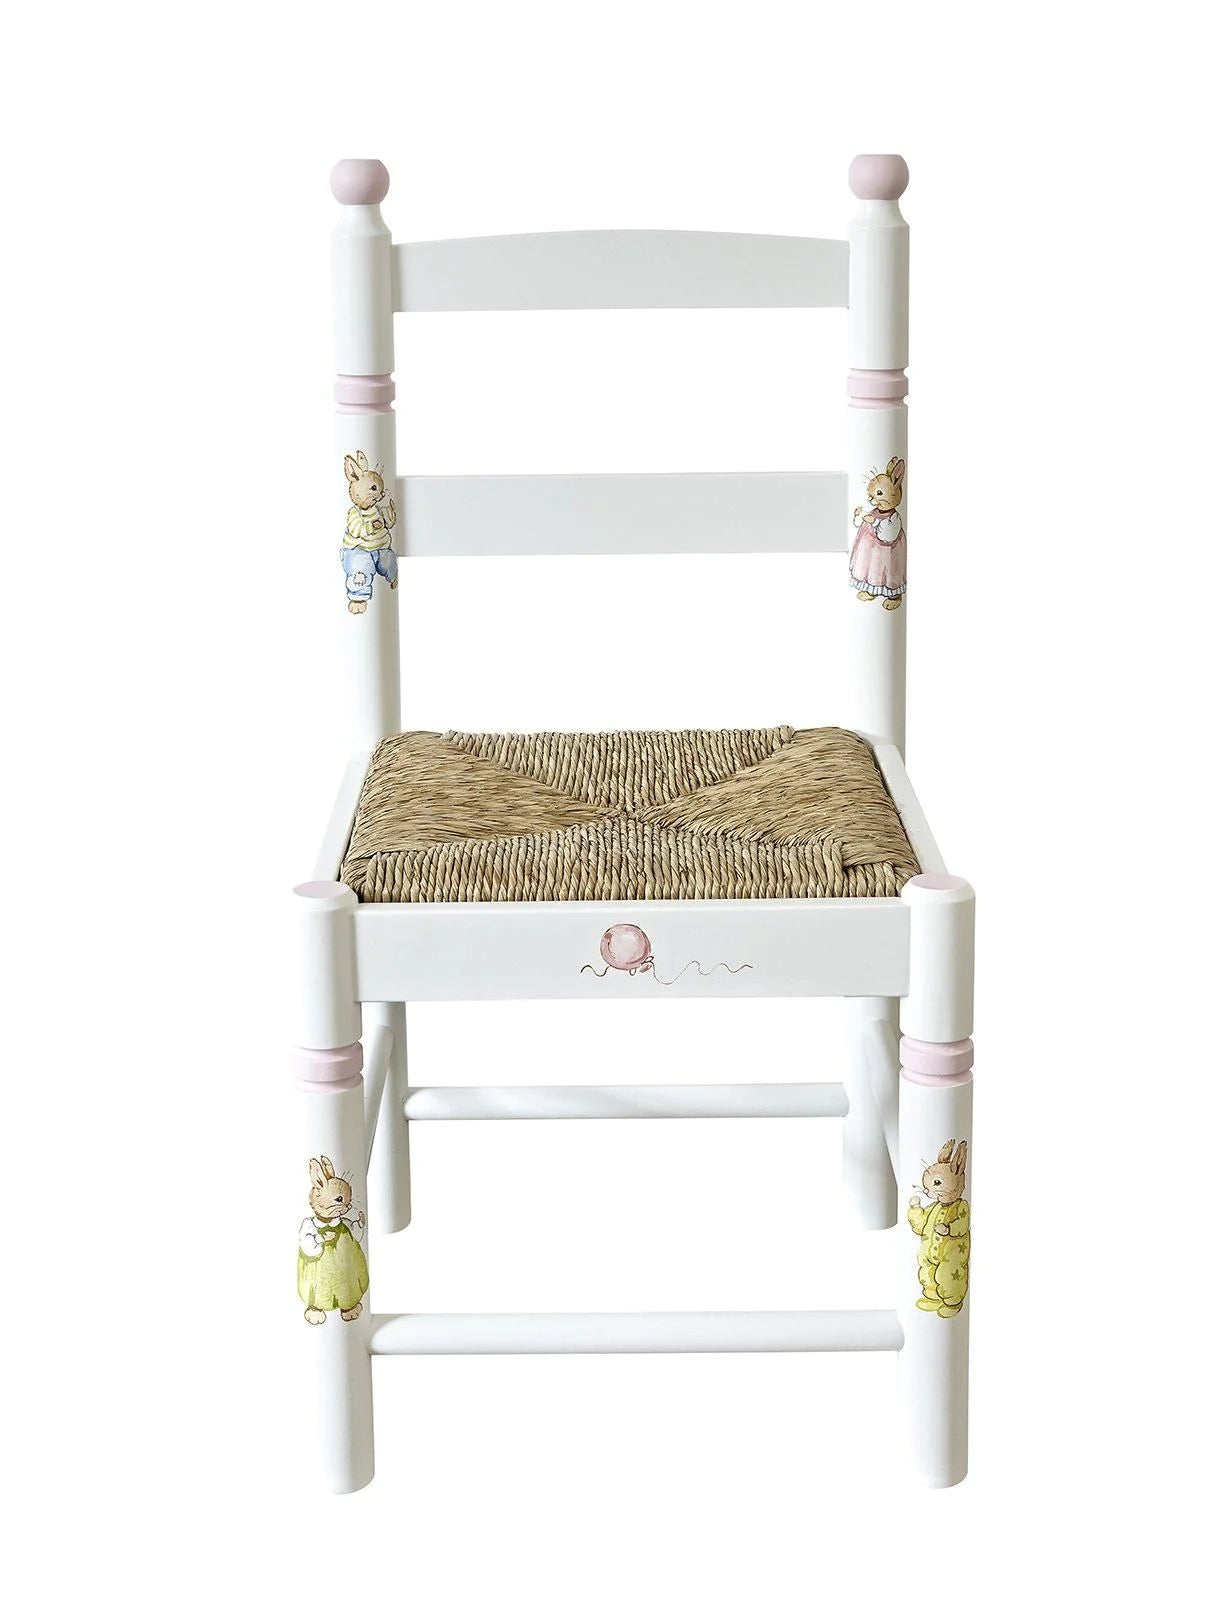 Dragons Rush Seated Chair - Barbara's Bunnies with Dragons Pink Trim